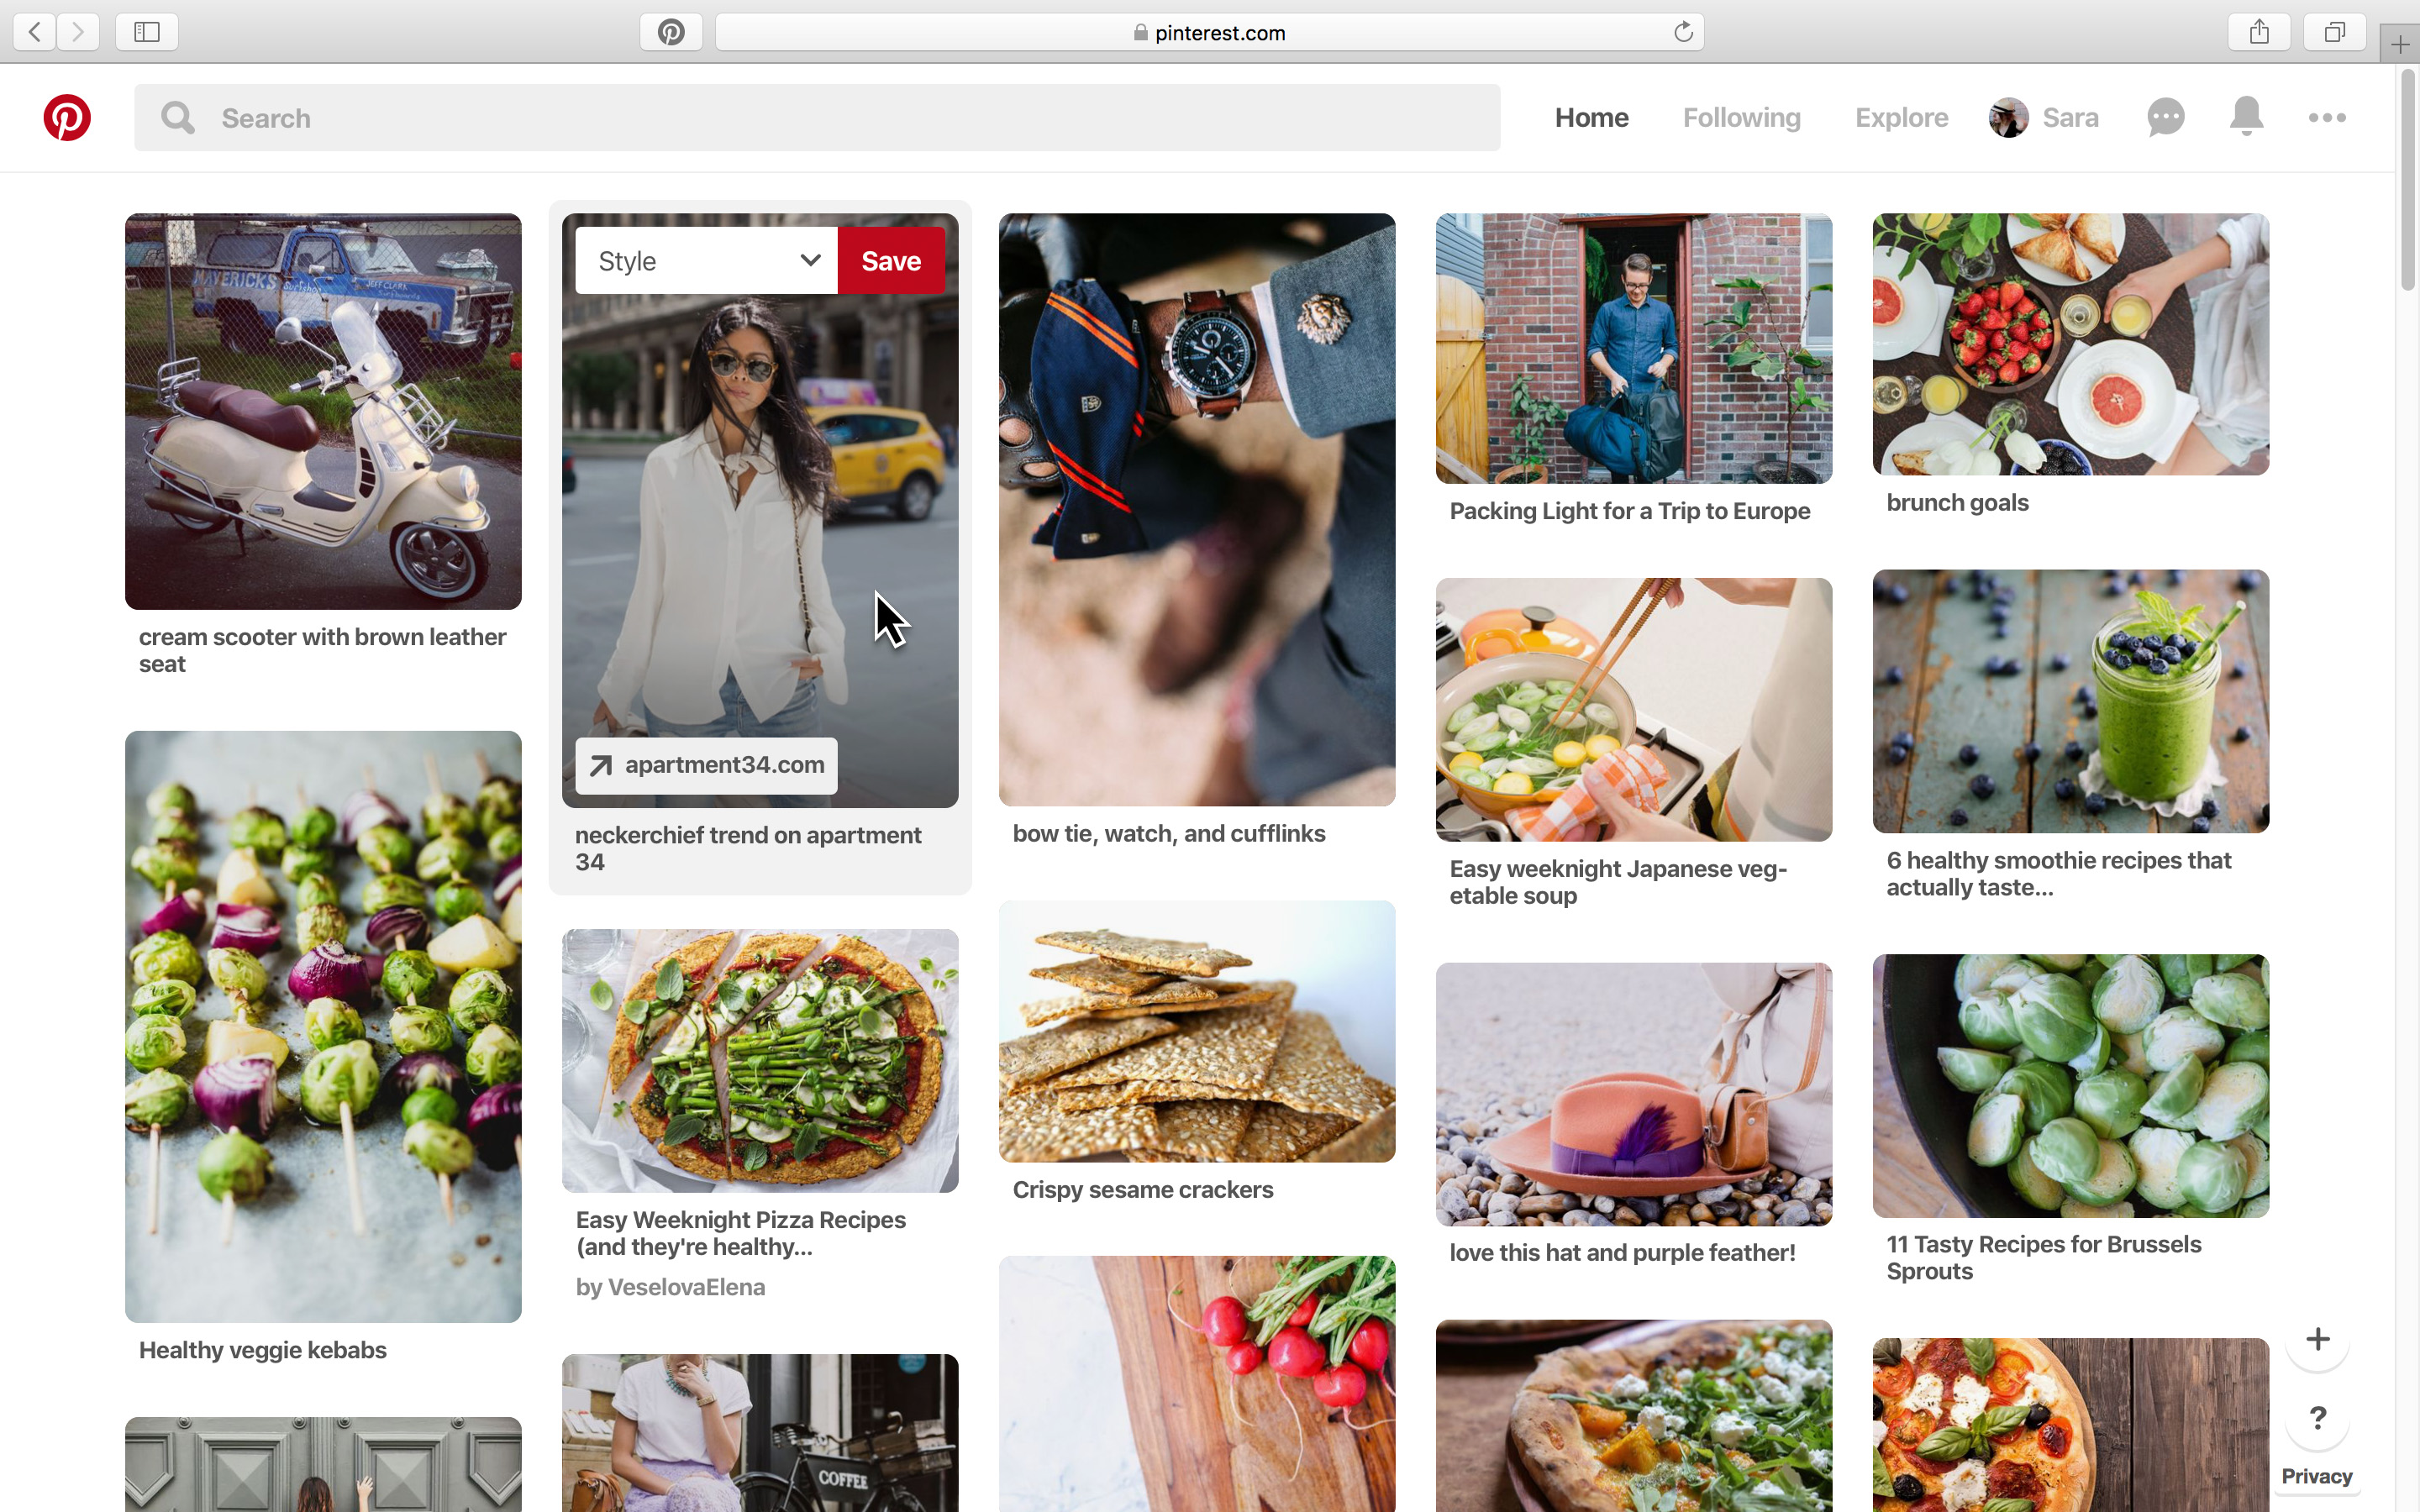 Image of one-click saving on Pinterest home feed